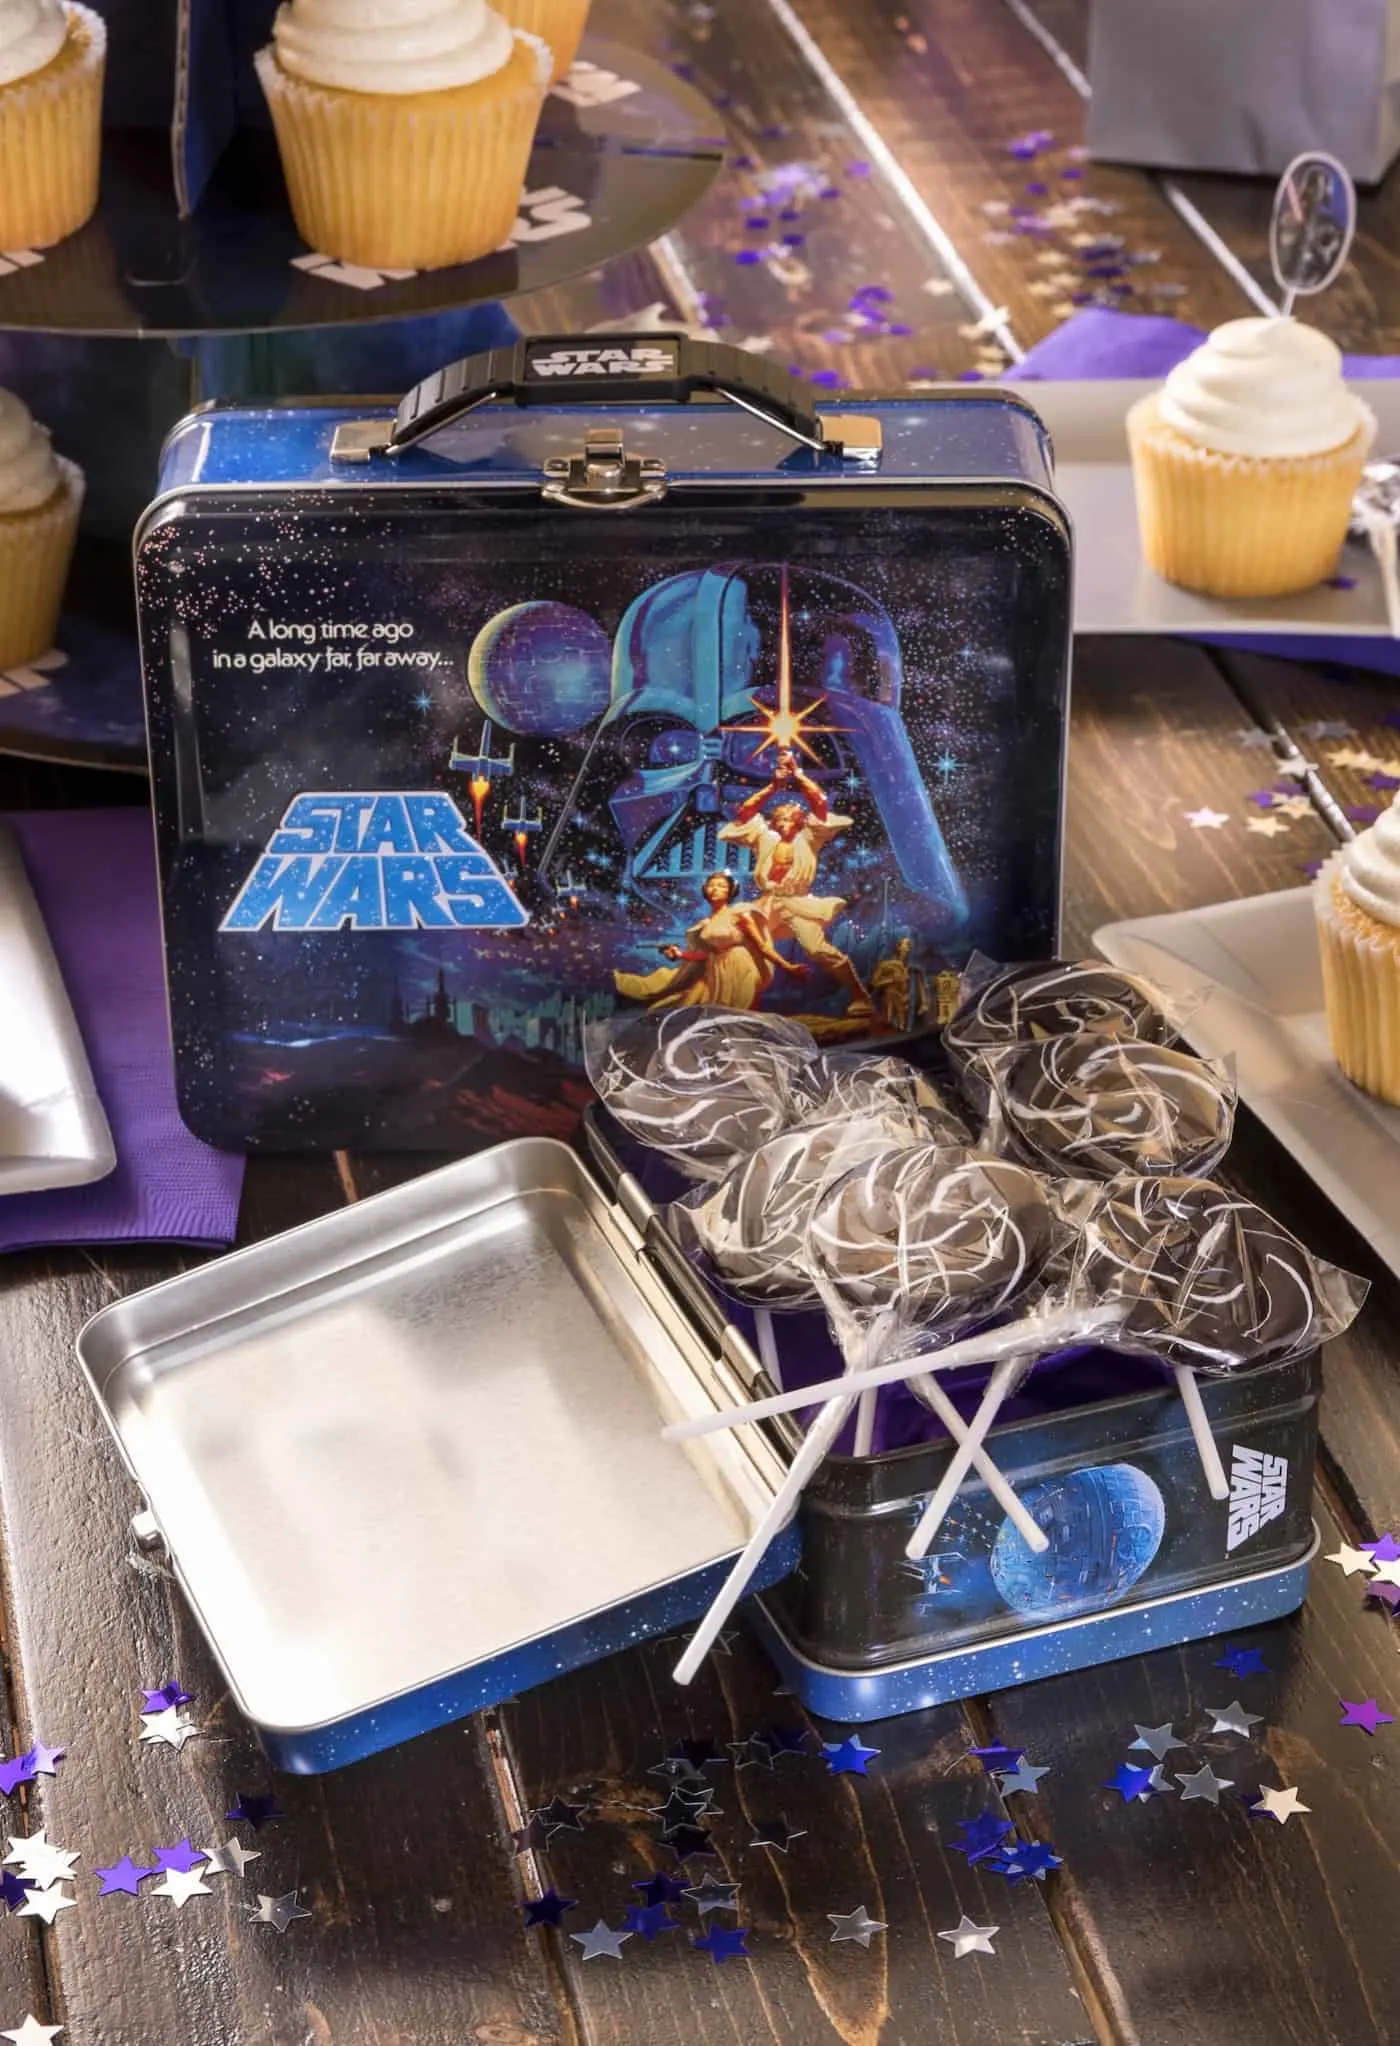 Learn how to have a Star Wars birthday party without blowing your kid's college fund! Here are my favorite tips and ideas including an R2-D2 DIY cup.